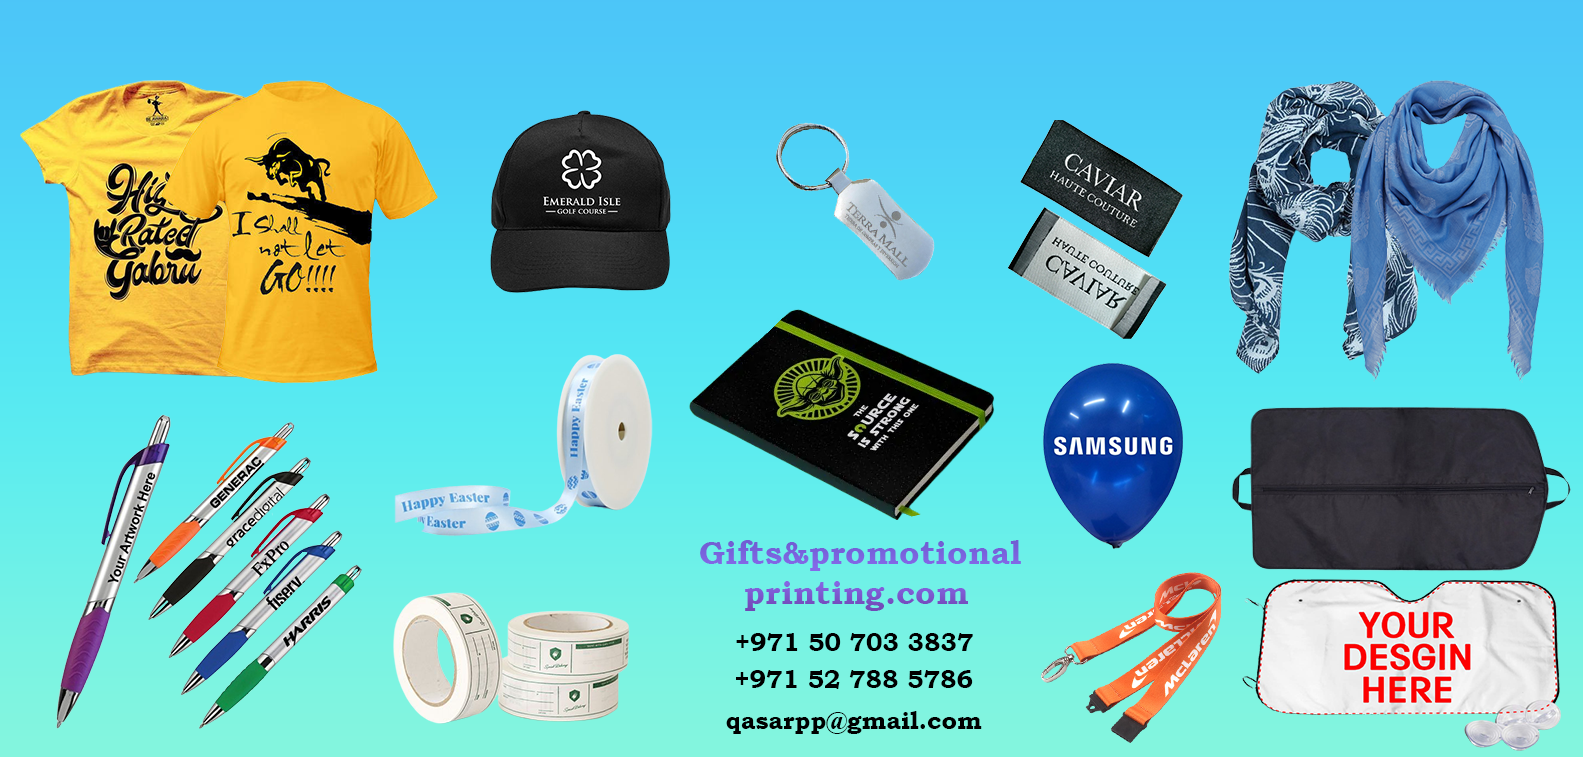 Gifts-And-Promotional-Items-printing-Suppliers-in-Dubai-Sharjah-Ajman-Abudhabi-UAE-Middle-East